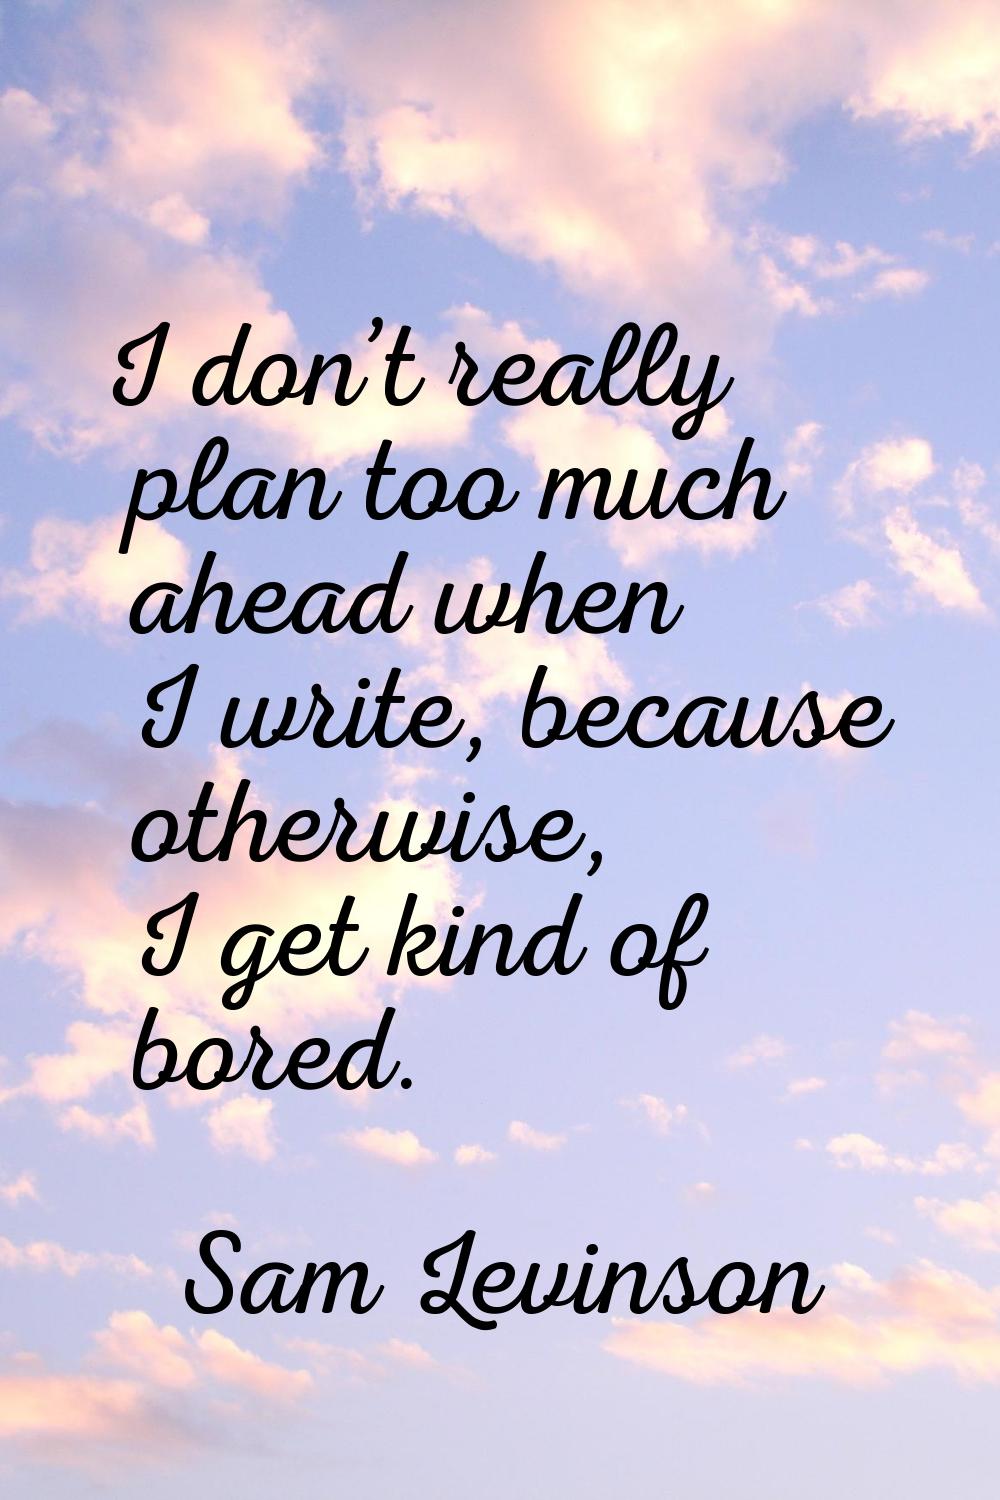 I don’t really plan too much ahead when I write, because otherwise, I get kind of bored.